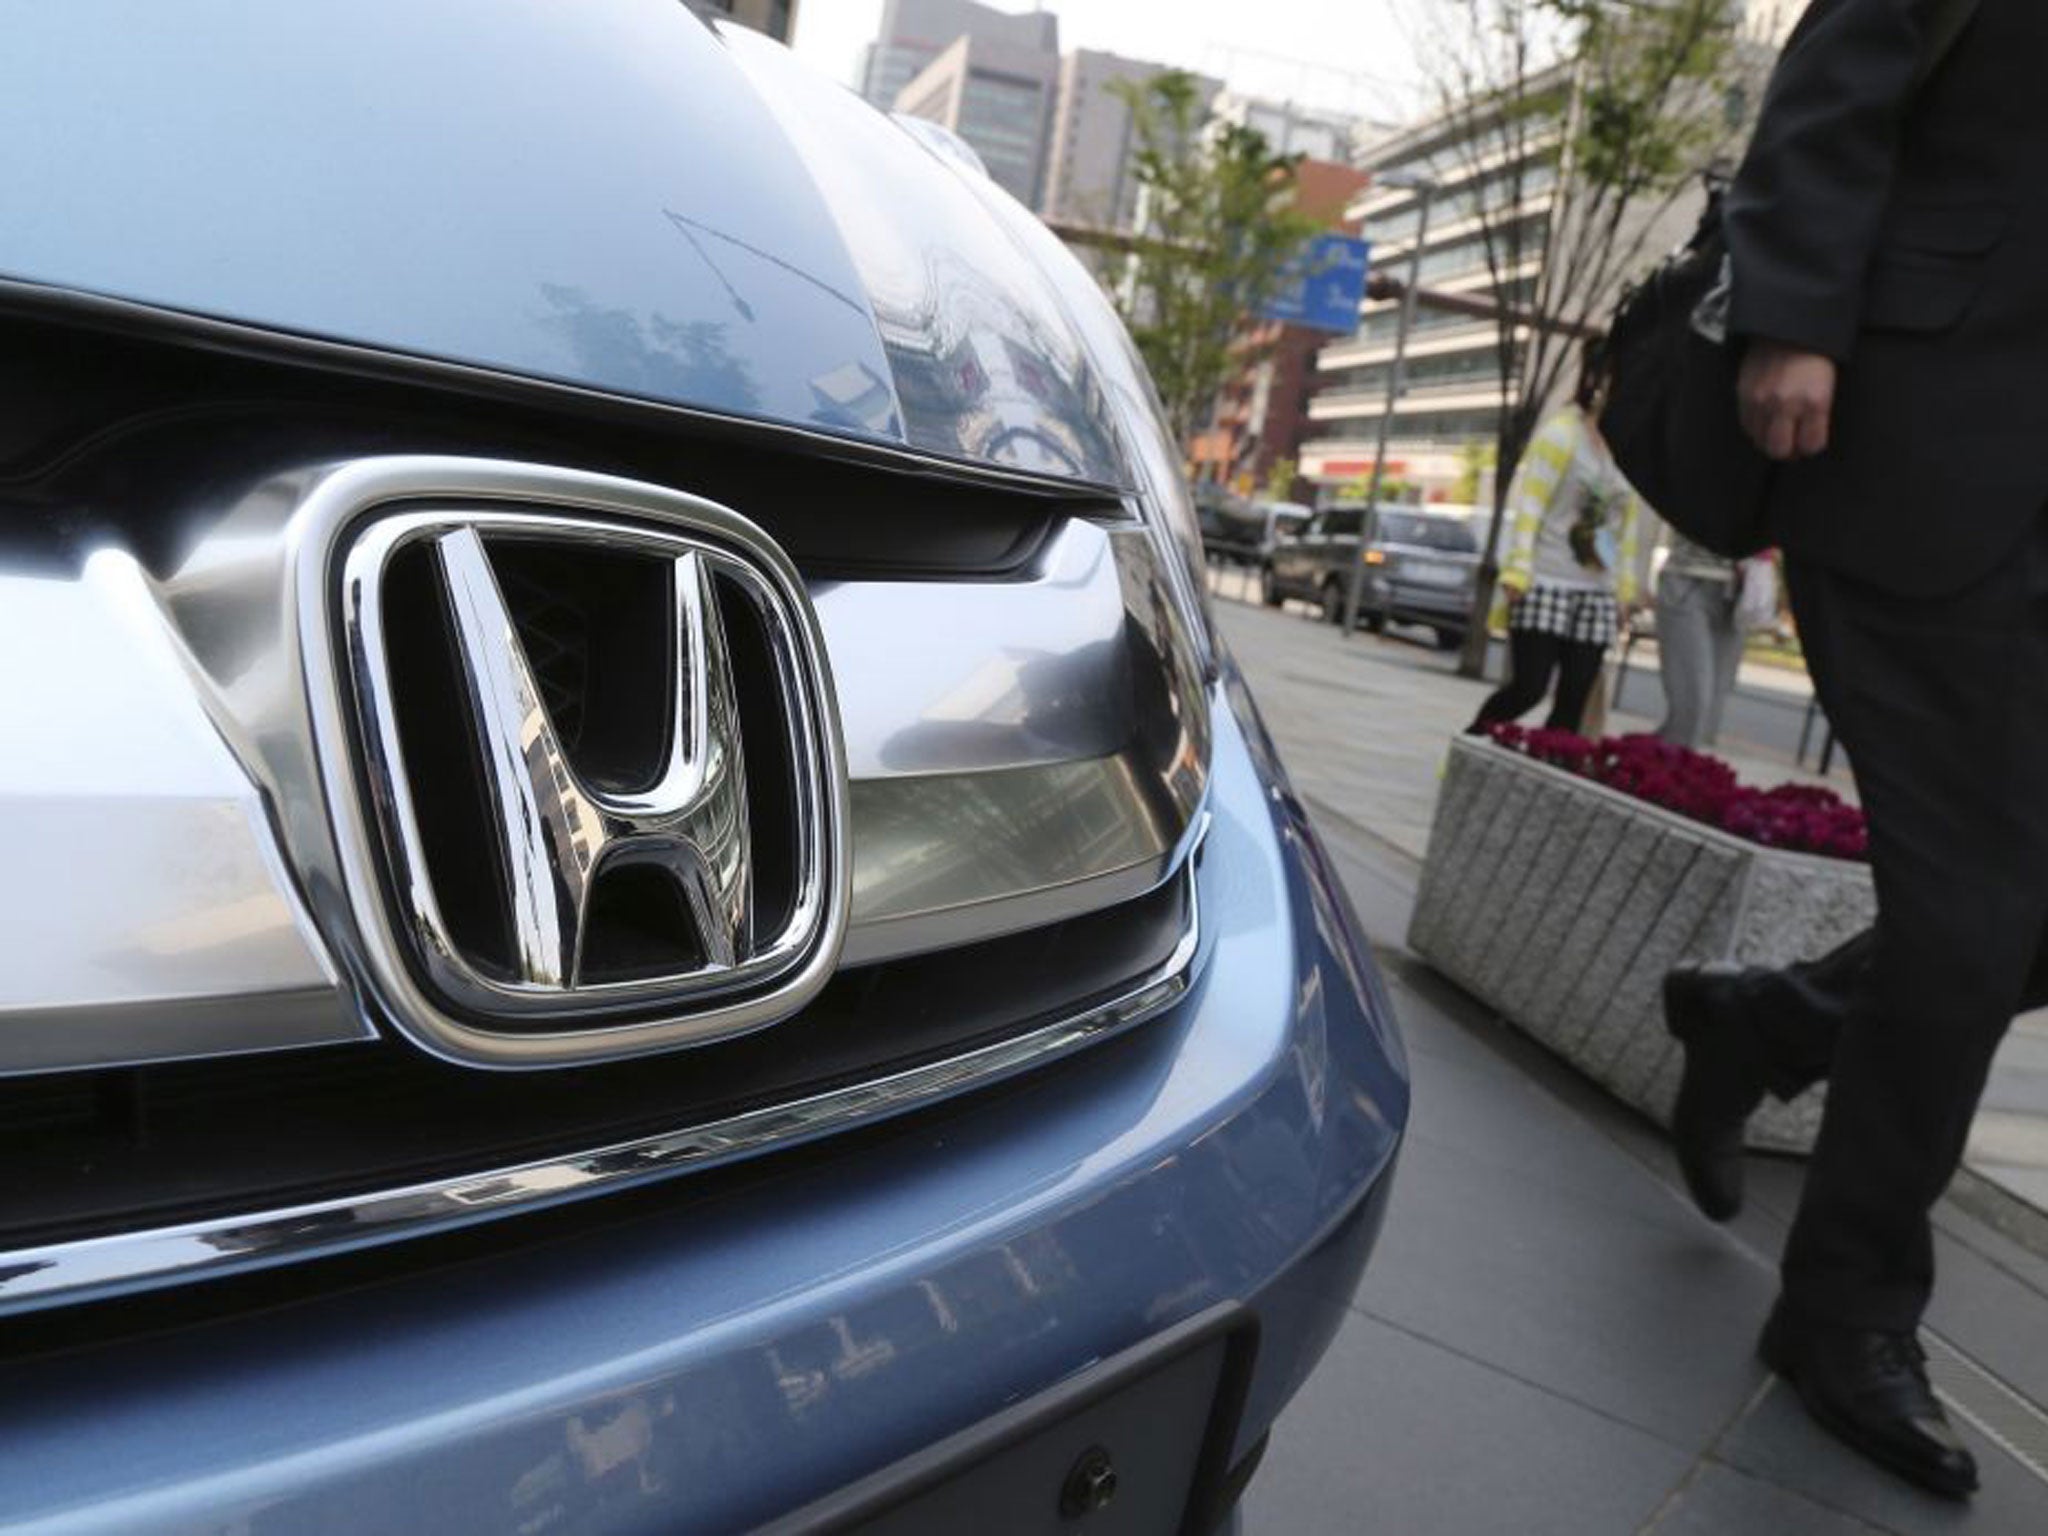 Shares in Honda fell as much as 4.9% after US regulators announced an investigation into airbag failures